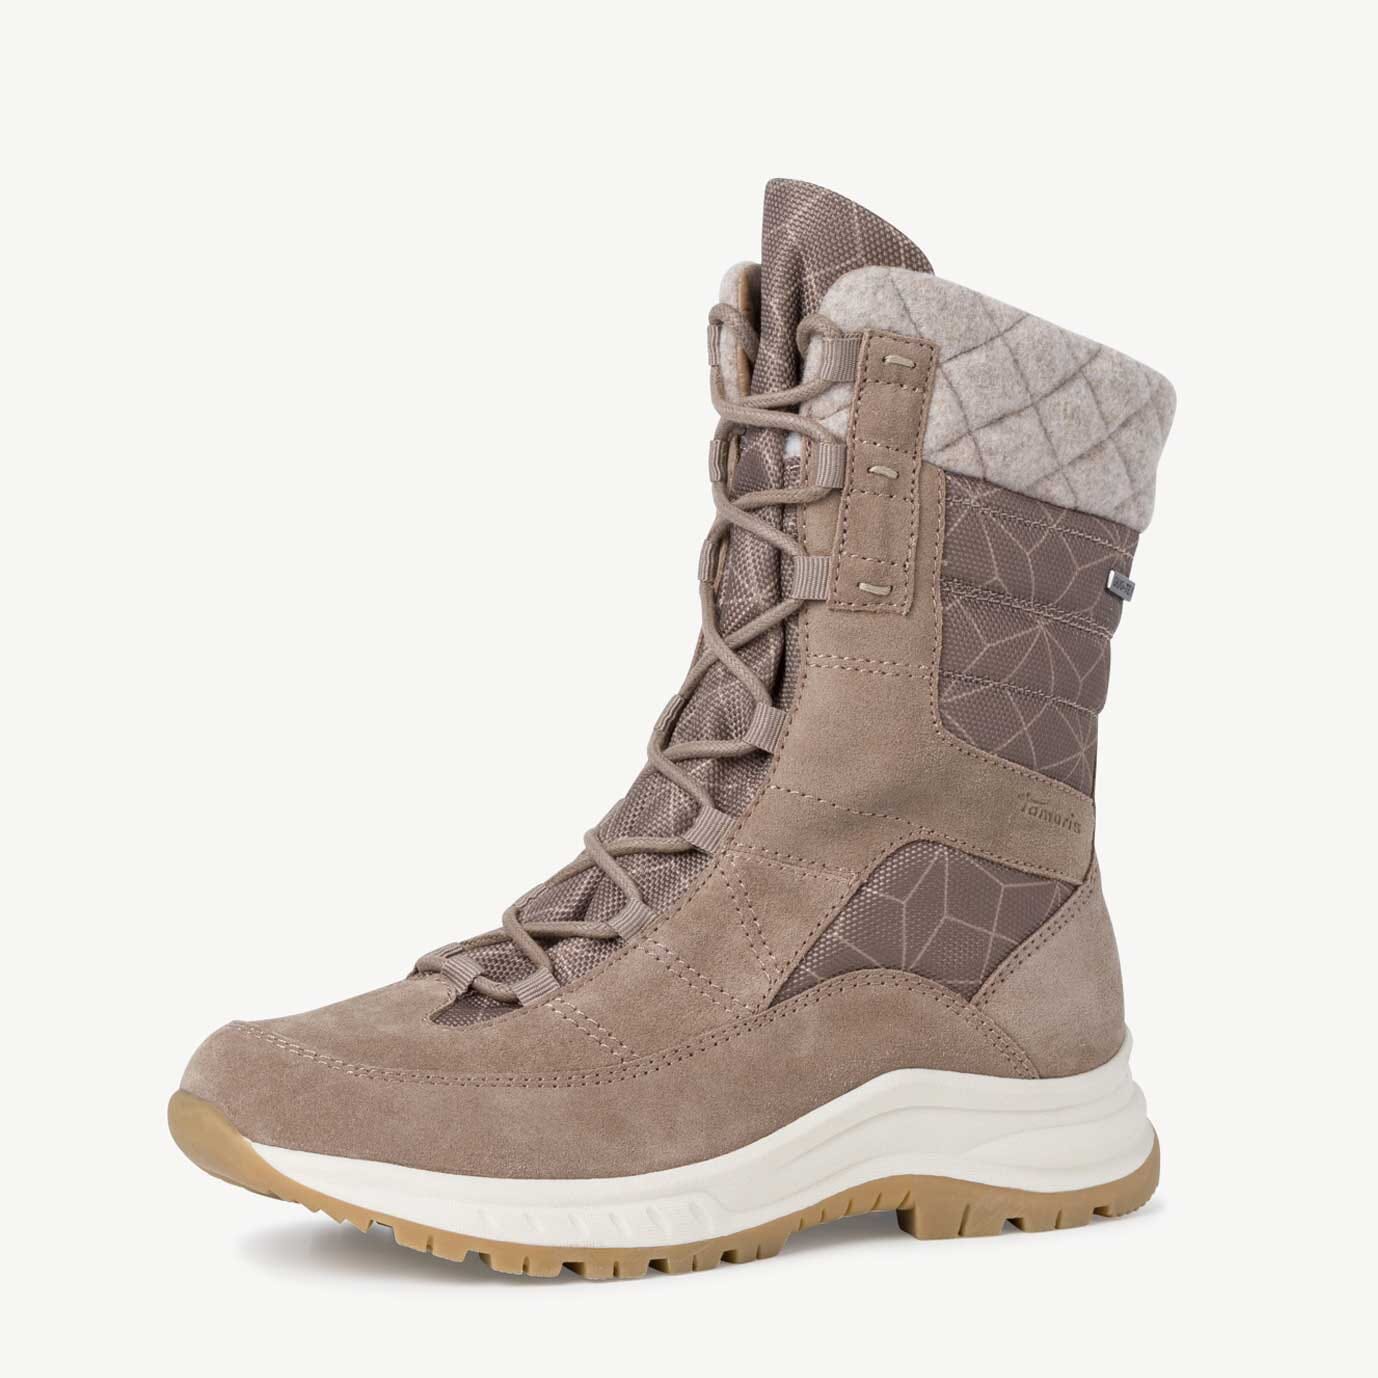 Tamaris Unisex Duotex Warm Lined Snow Boots Unisex Shoes Shafi Pvt. Limited Taupe EUR 36 